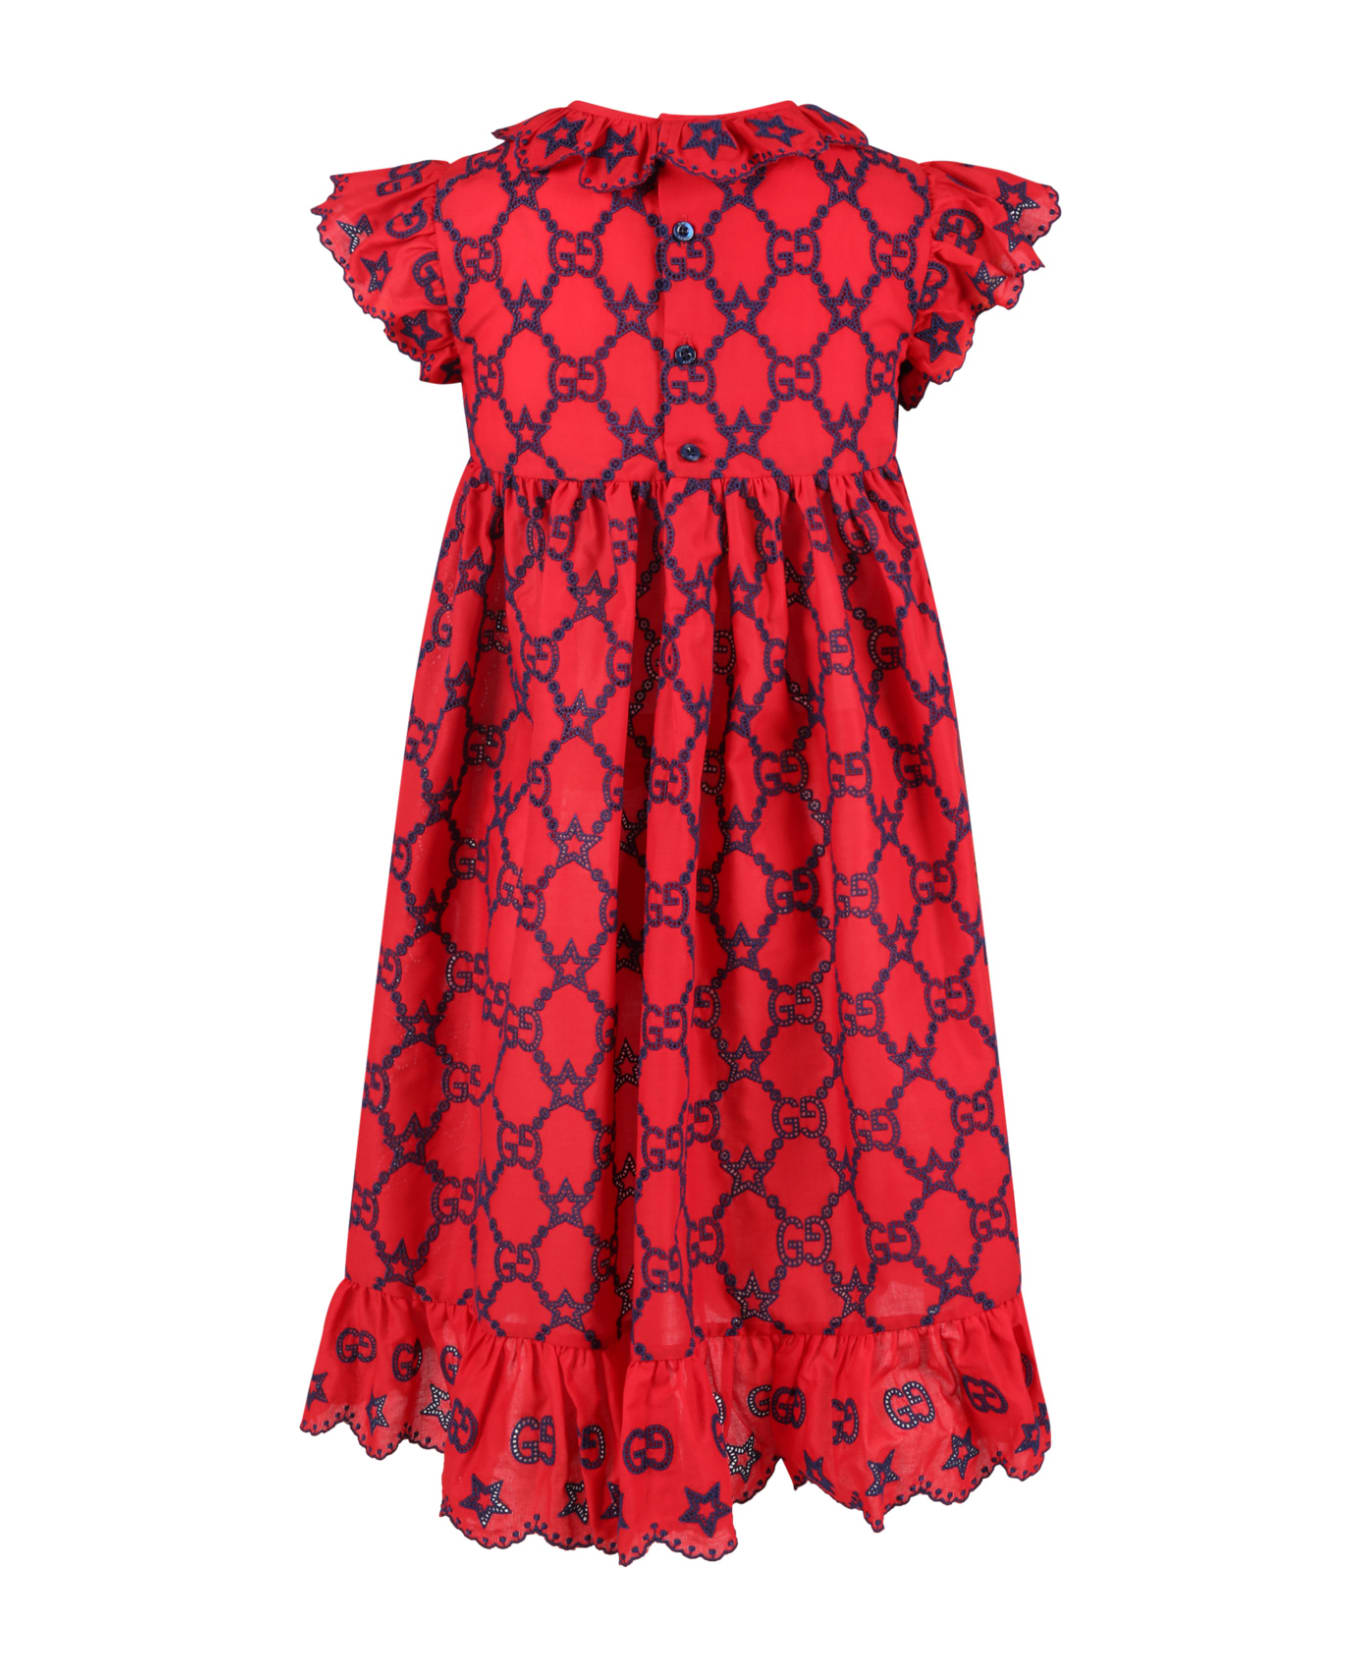 Gucci Red Dress For Girl With Stars - Red Navy